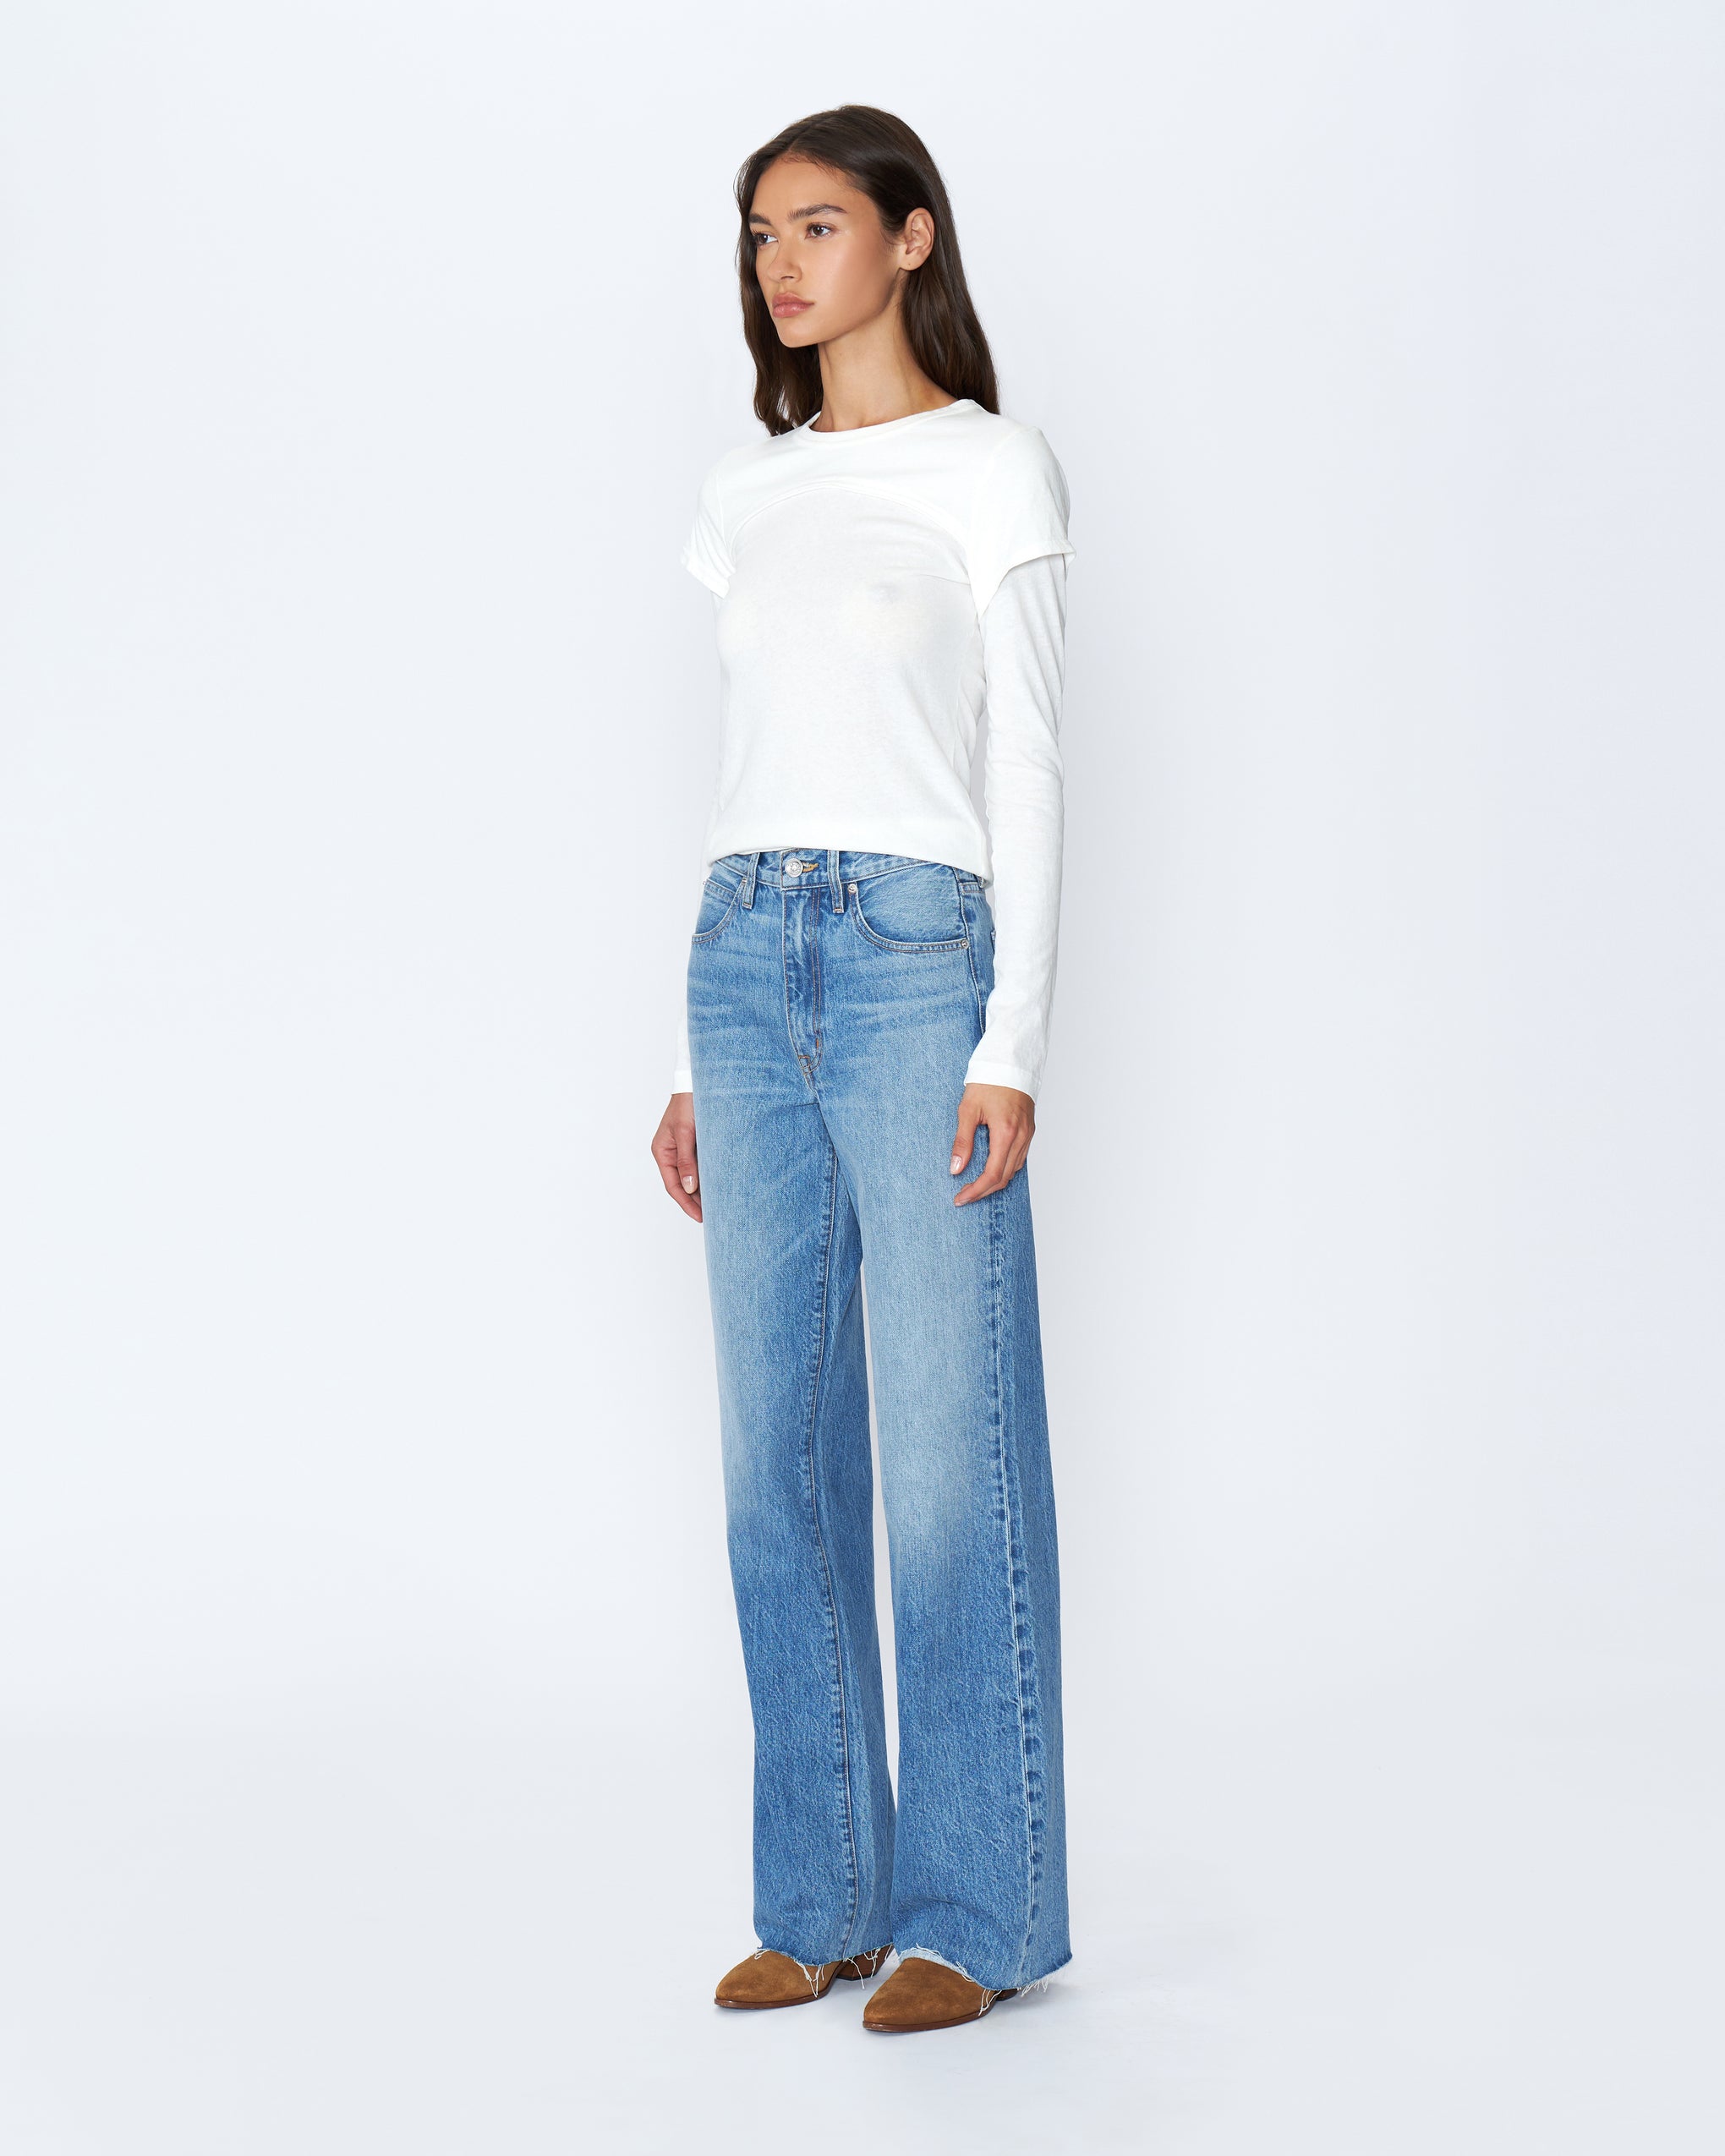 The SLVRLAKE Grace High Rise Wide Leg Jeans in Great Romance available at The New Trend.